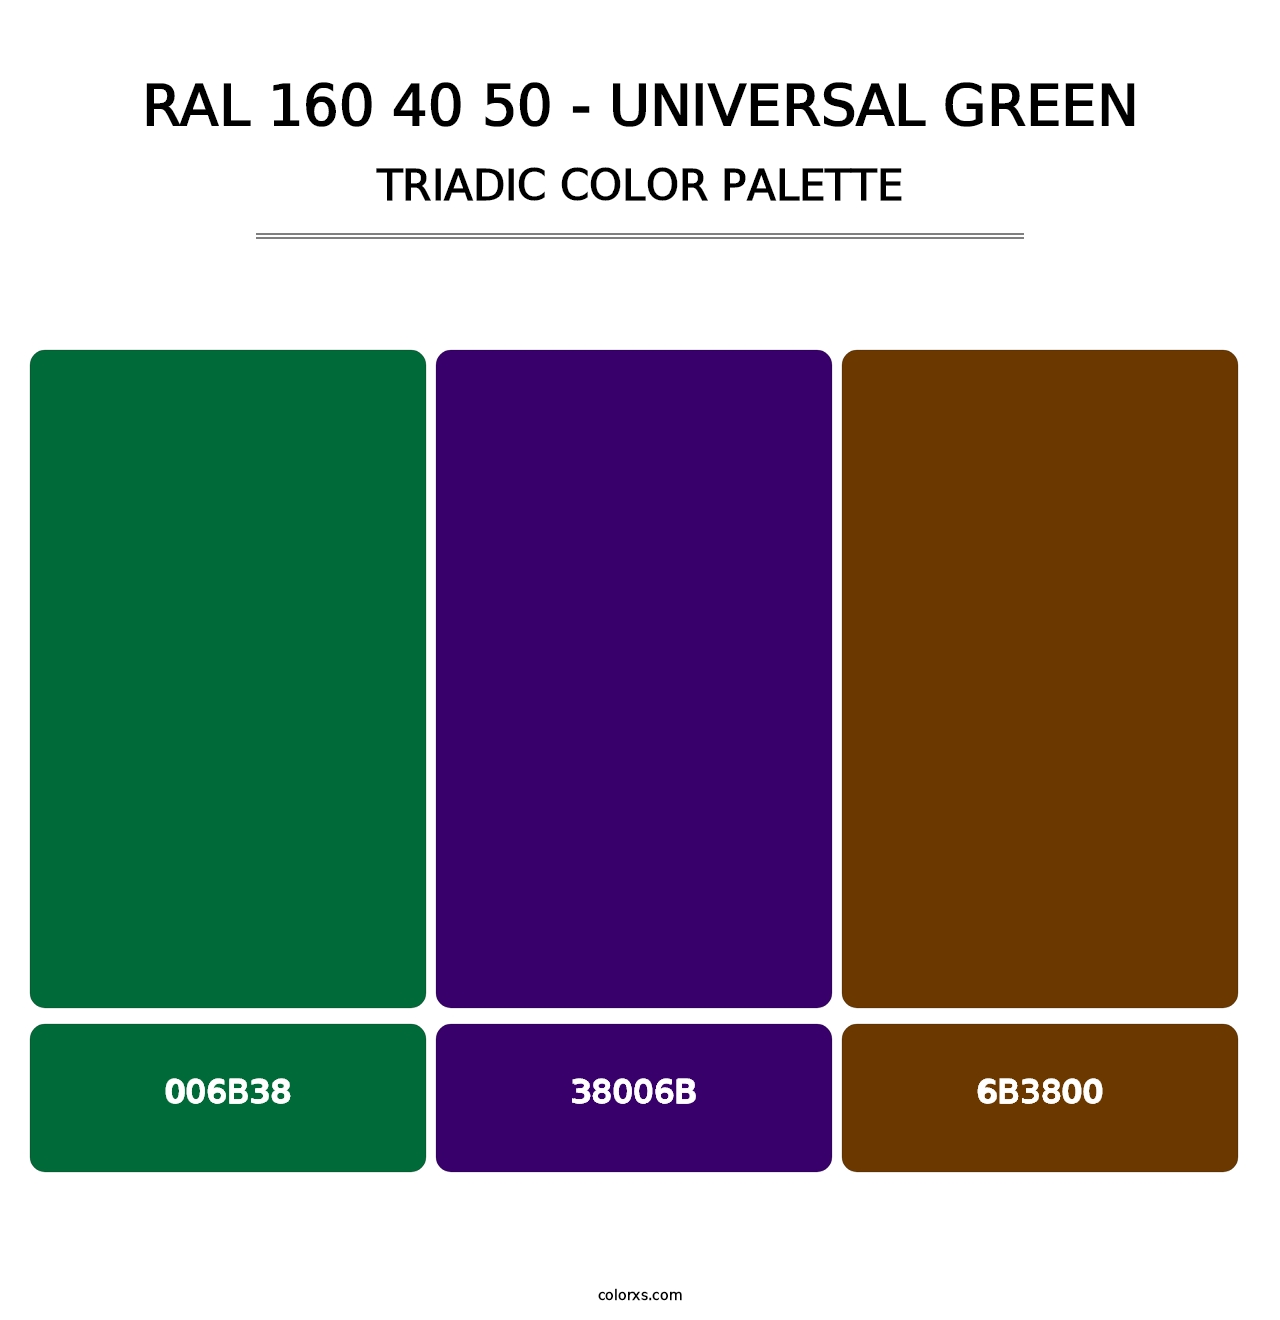 RAL 160 40 50 - Universal Green - Triadic Color Palette